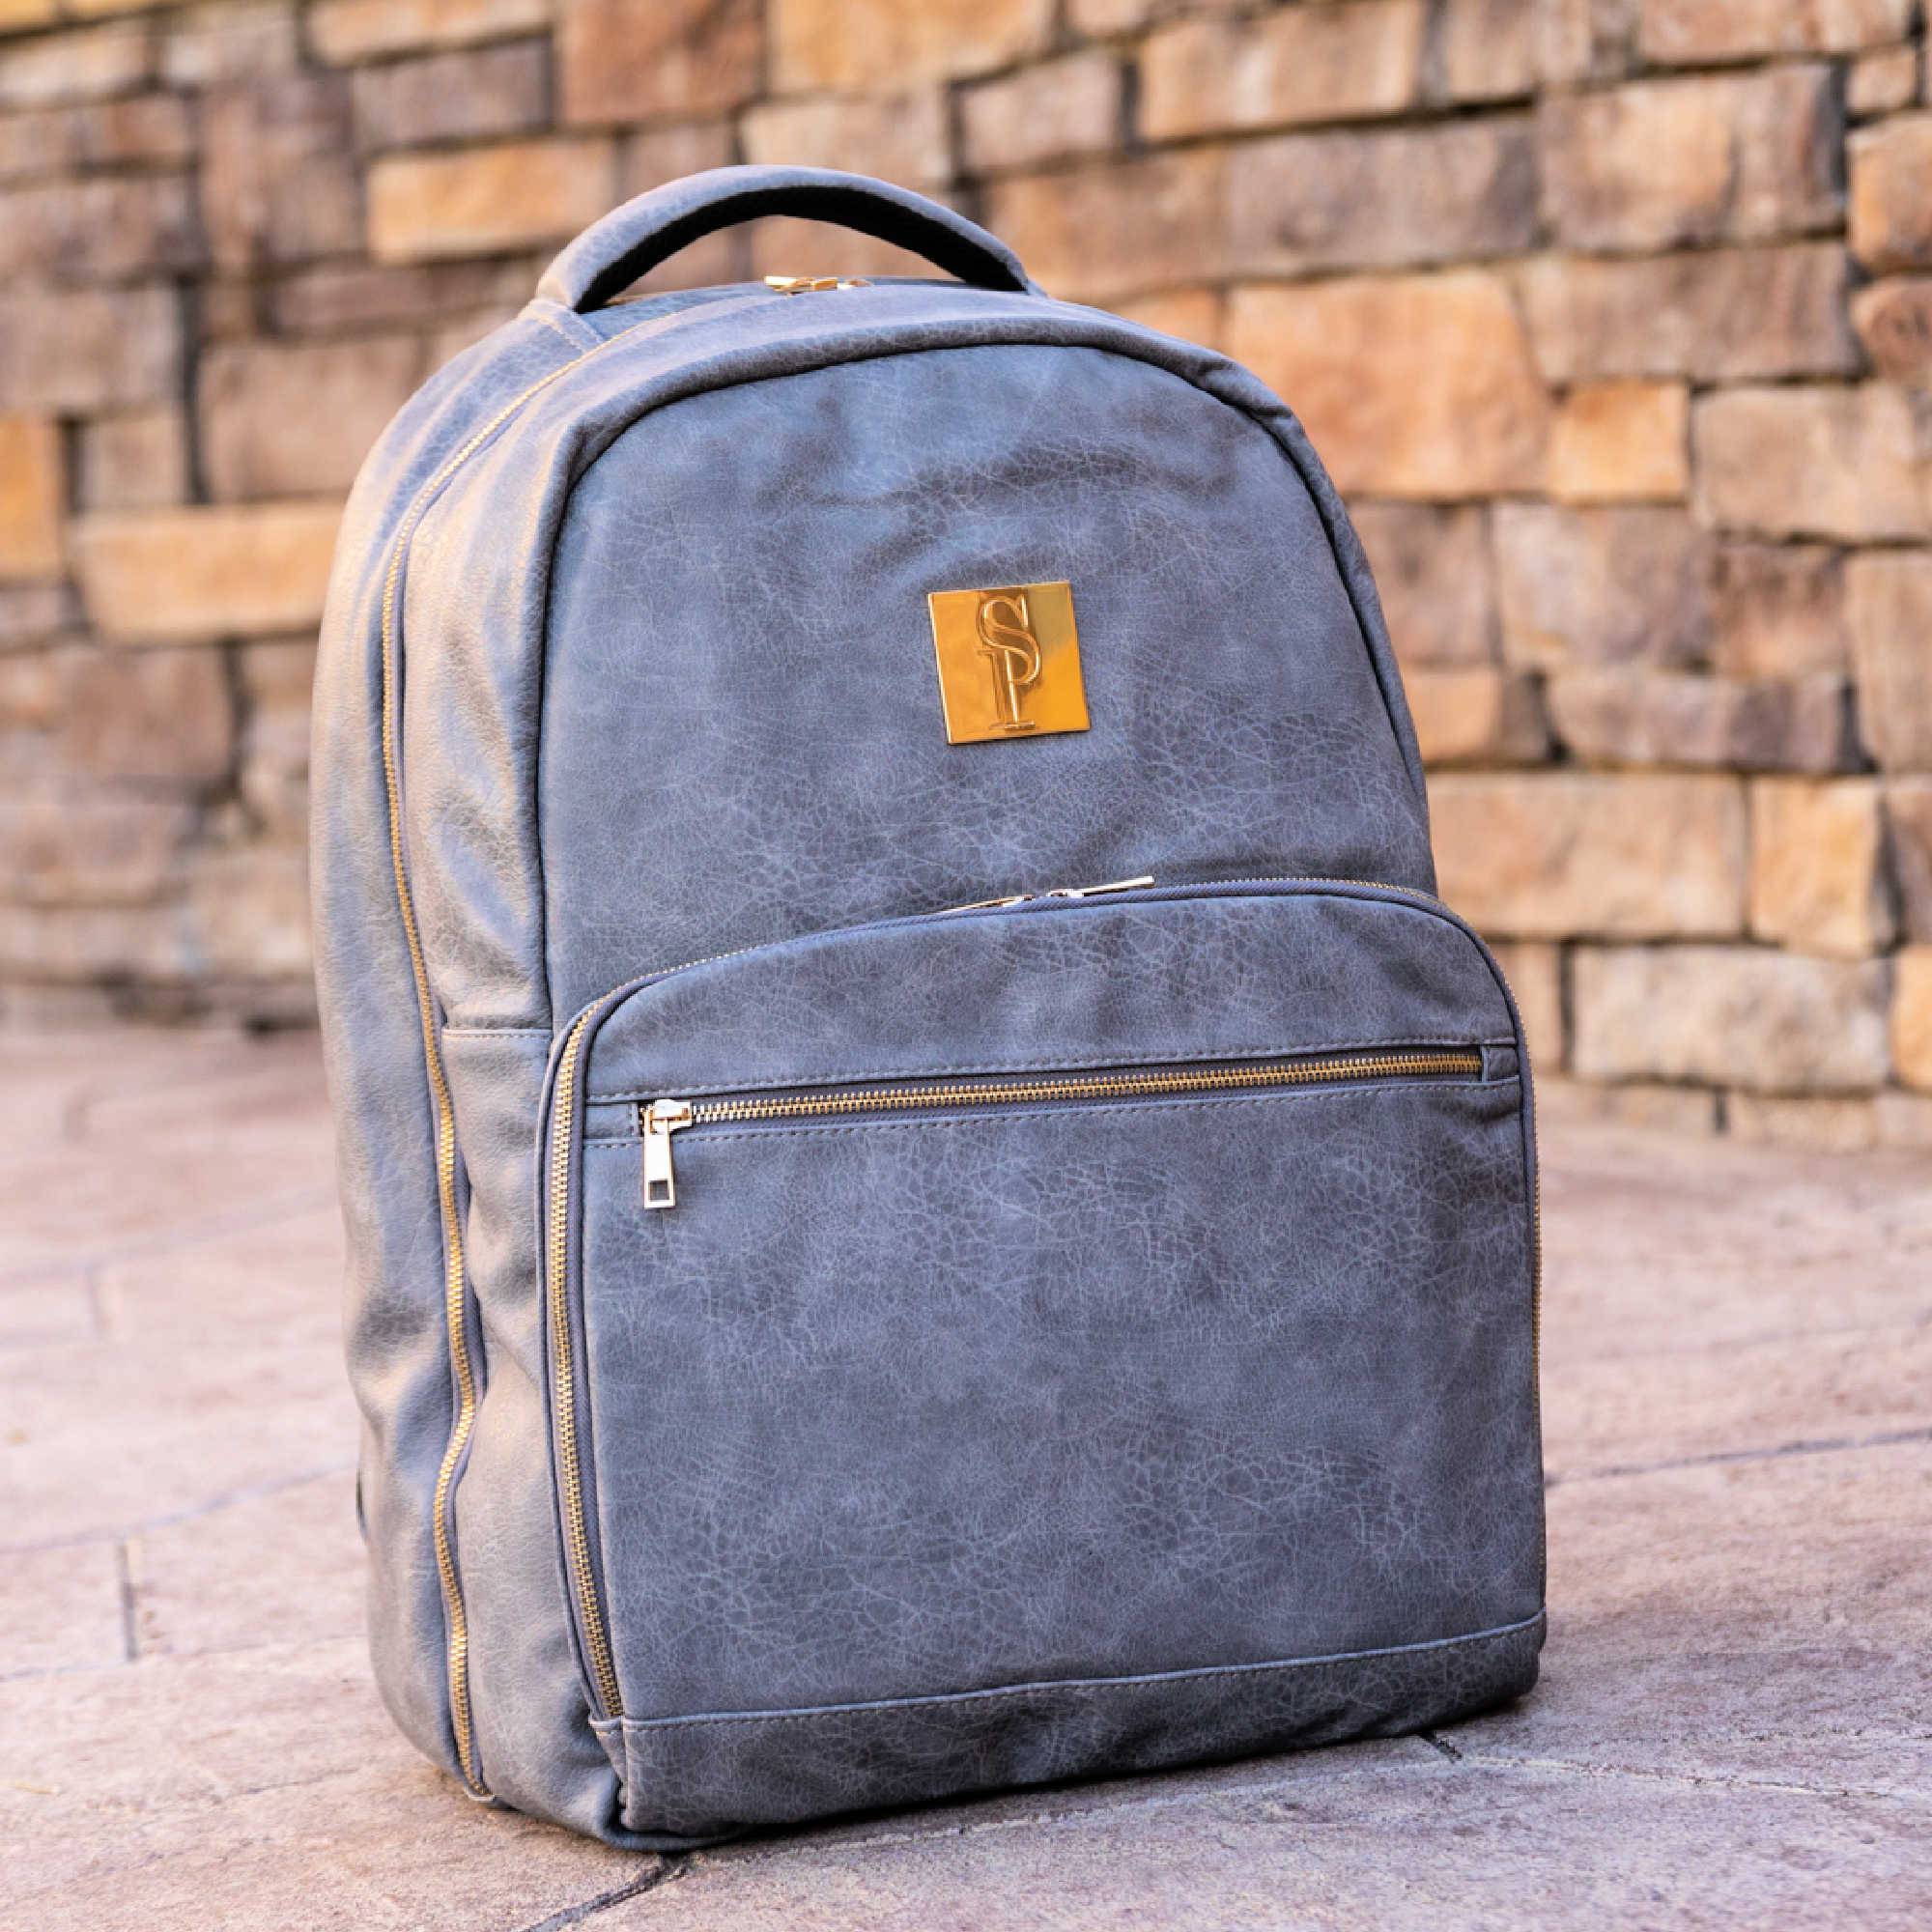 Grey Tumbled Leather Commuter Bag - Sole Premise